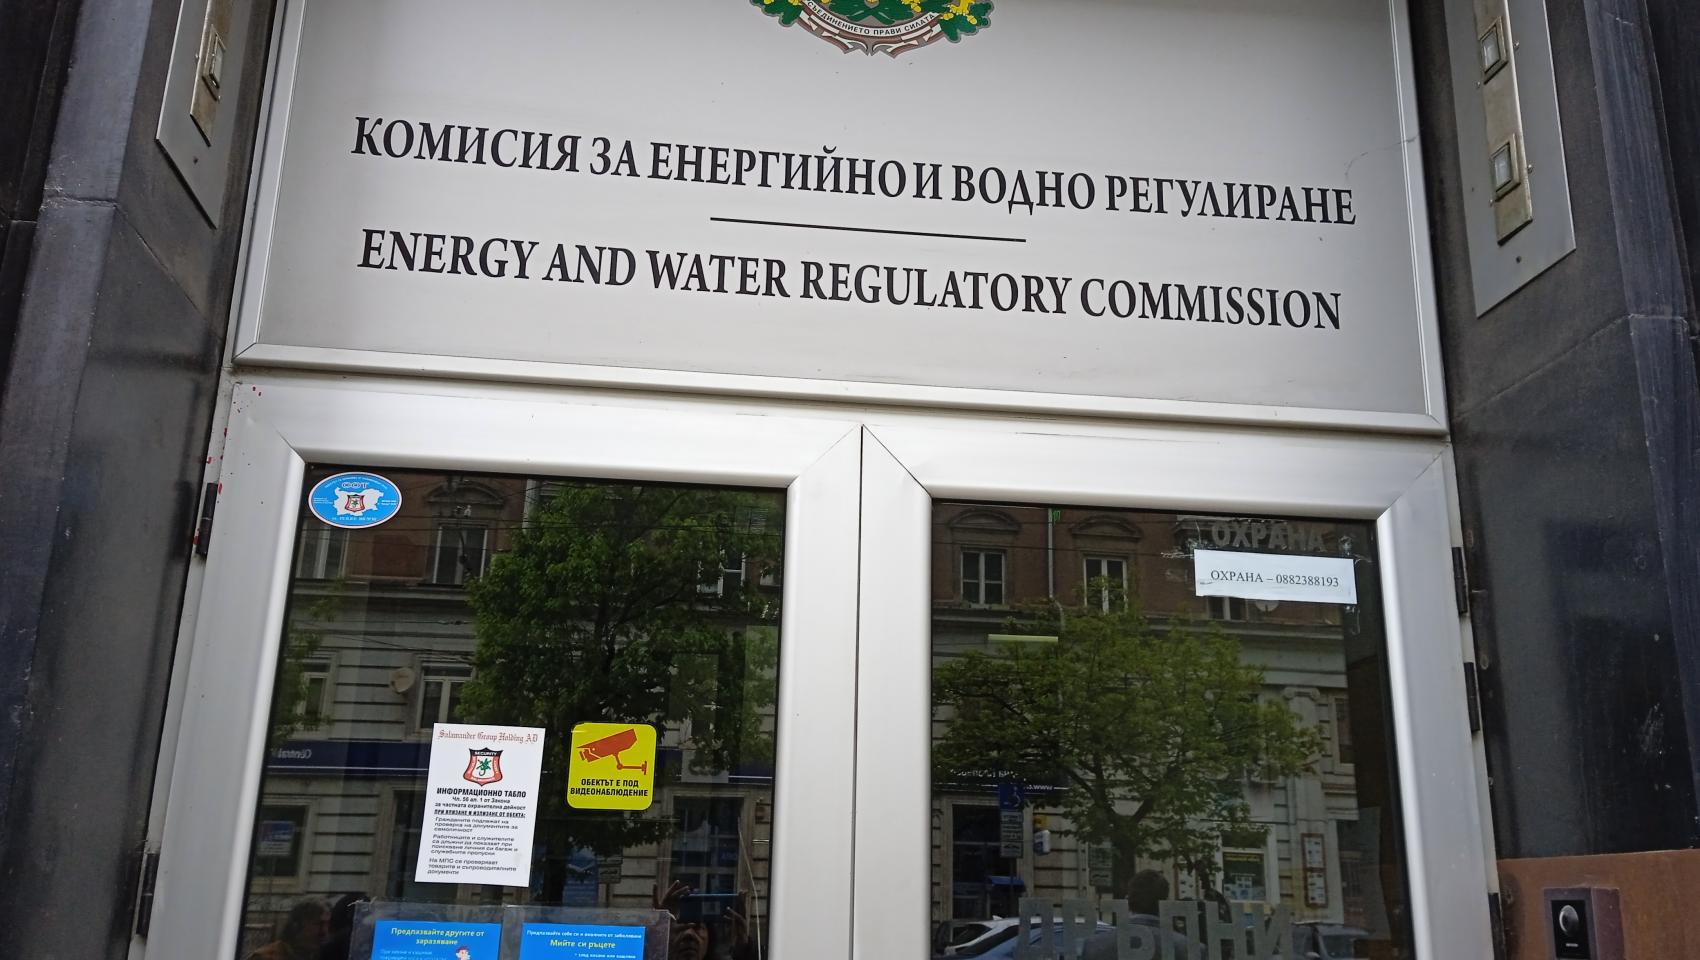 The Energy and Water Regulation Commission (EWRC) proposes that the